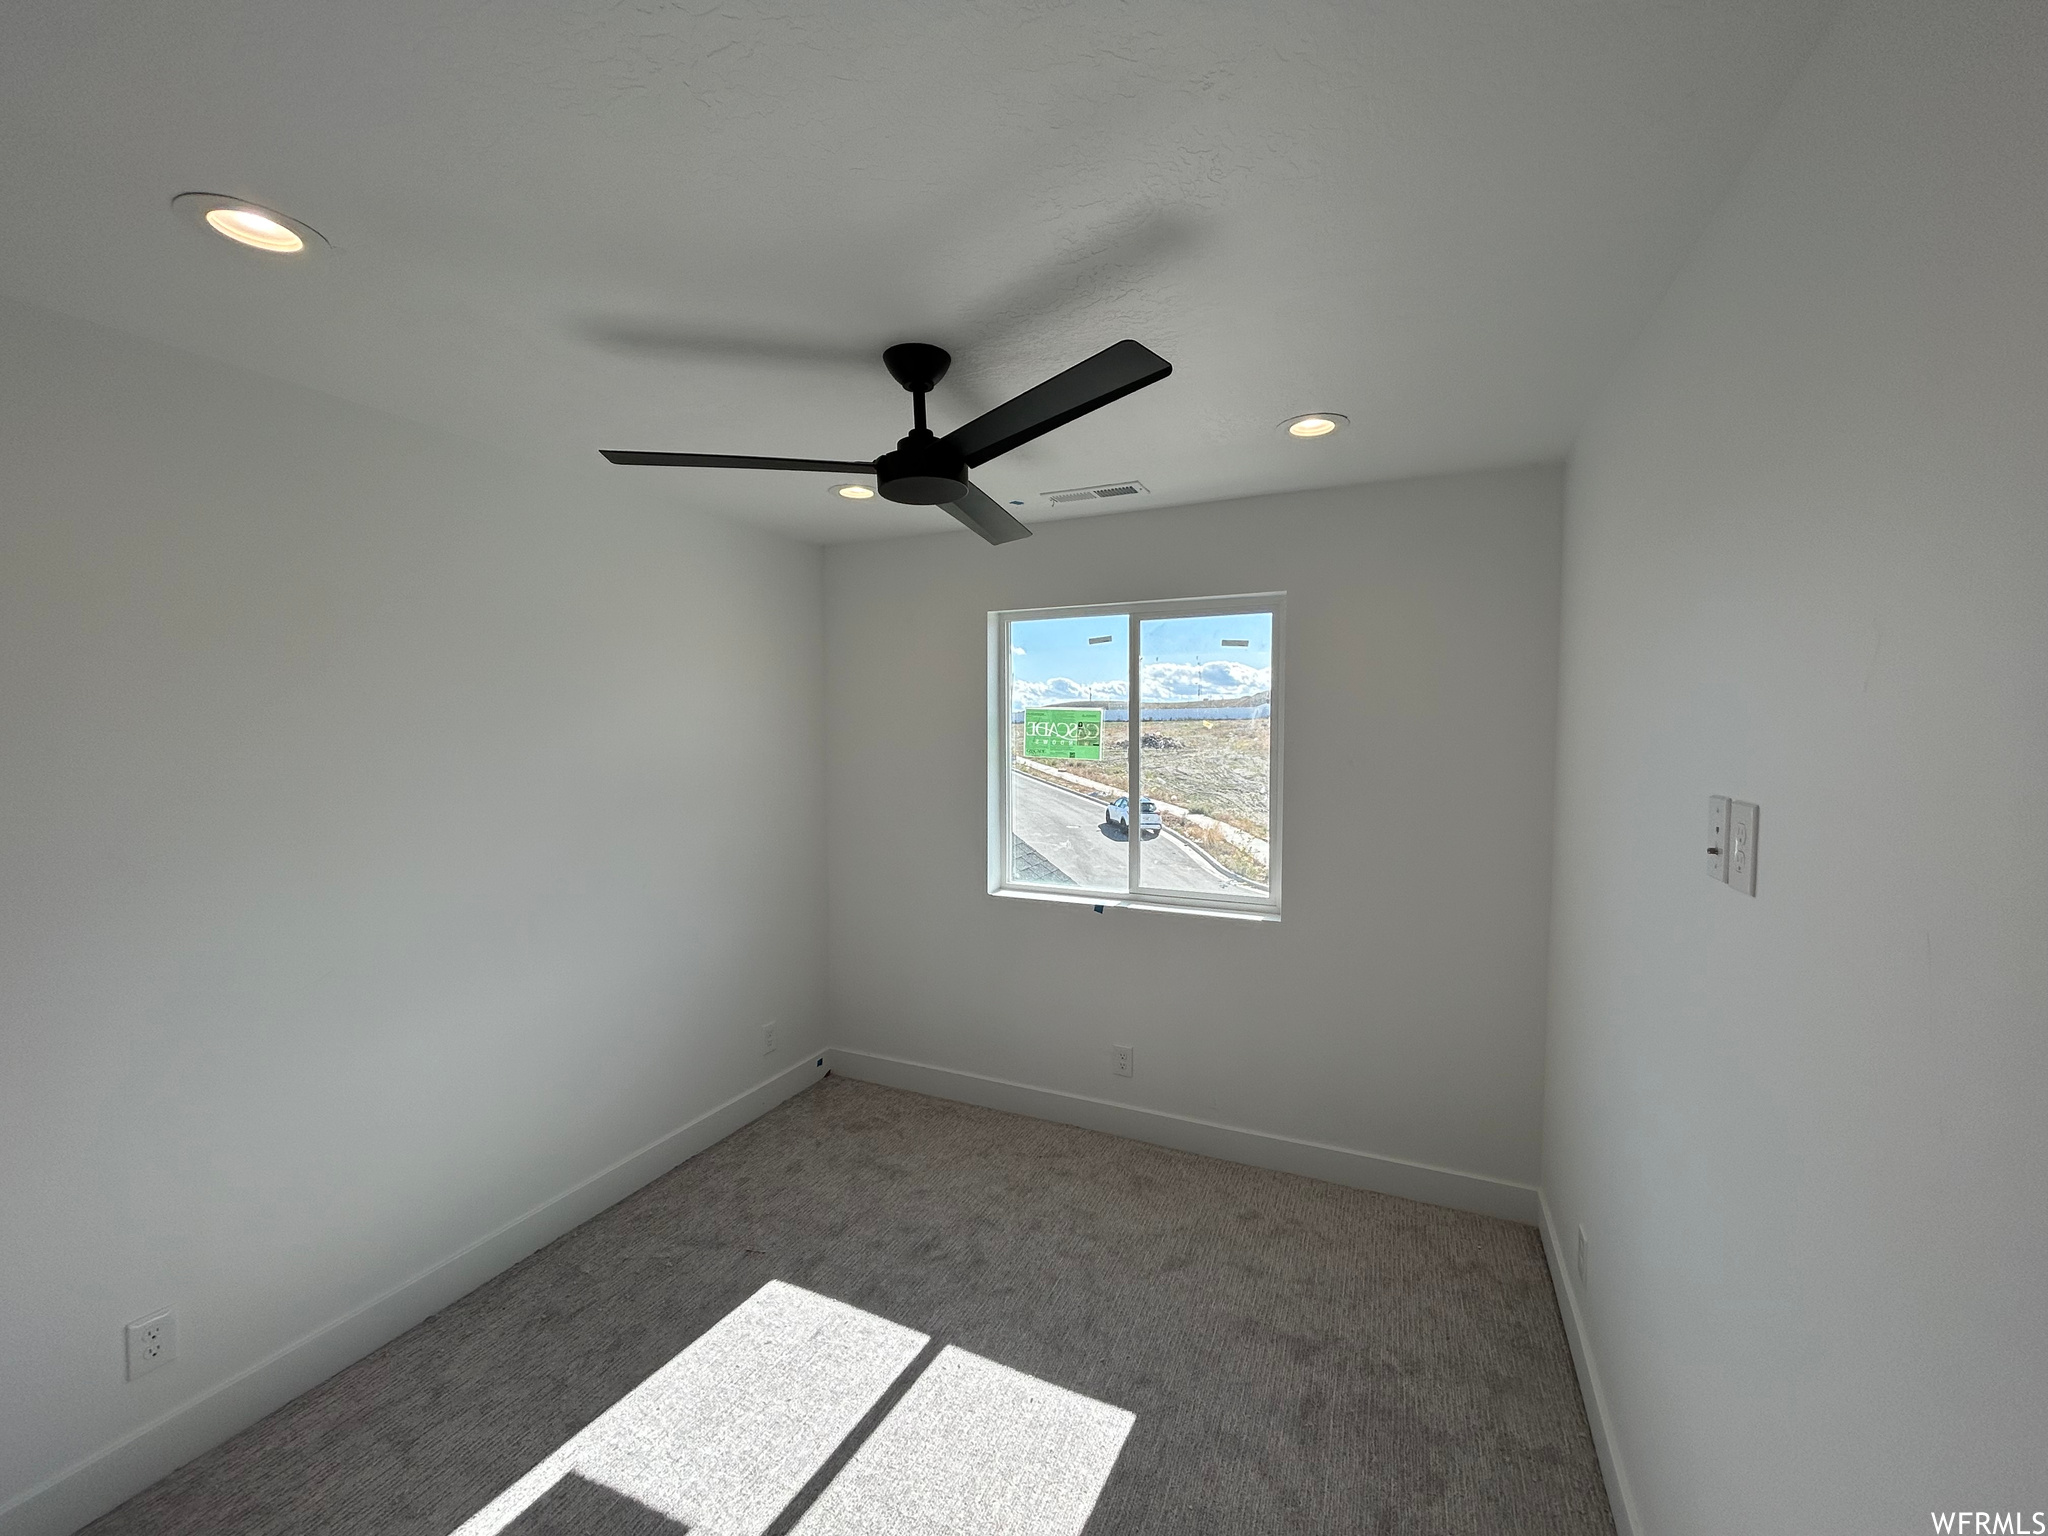 Empty room with ceiling fan and light colored carpet